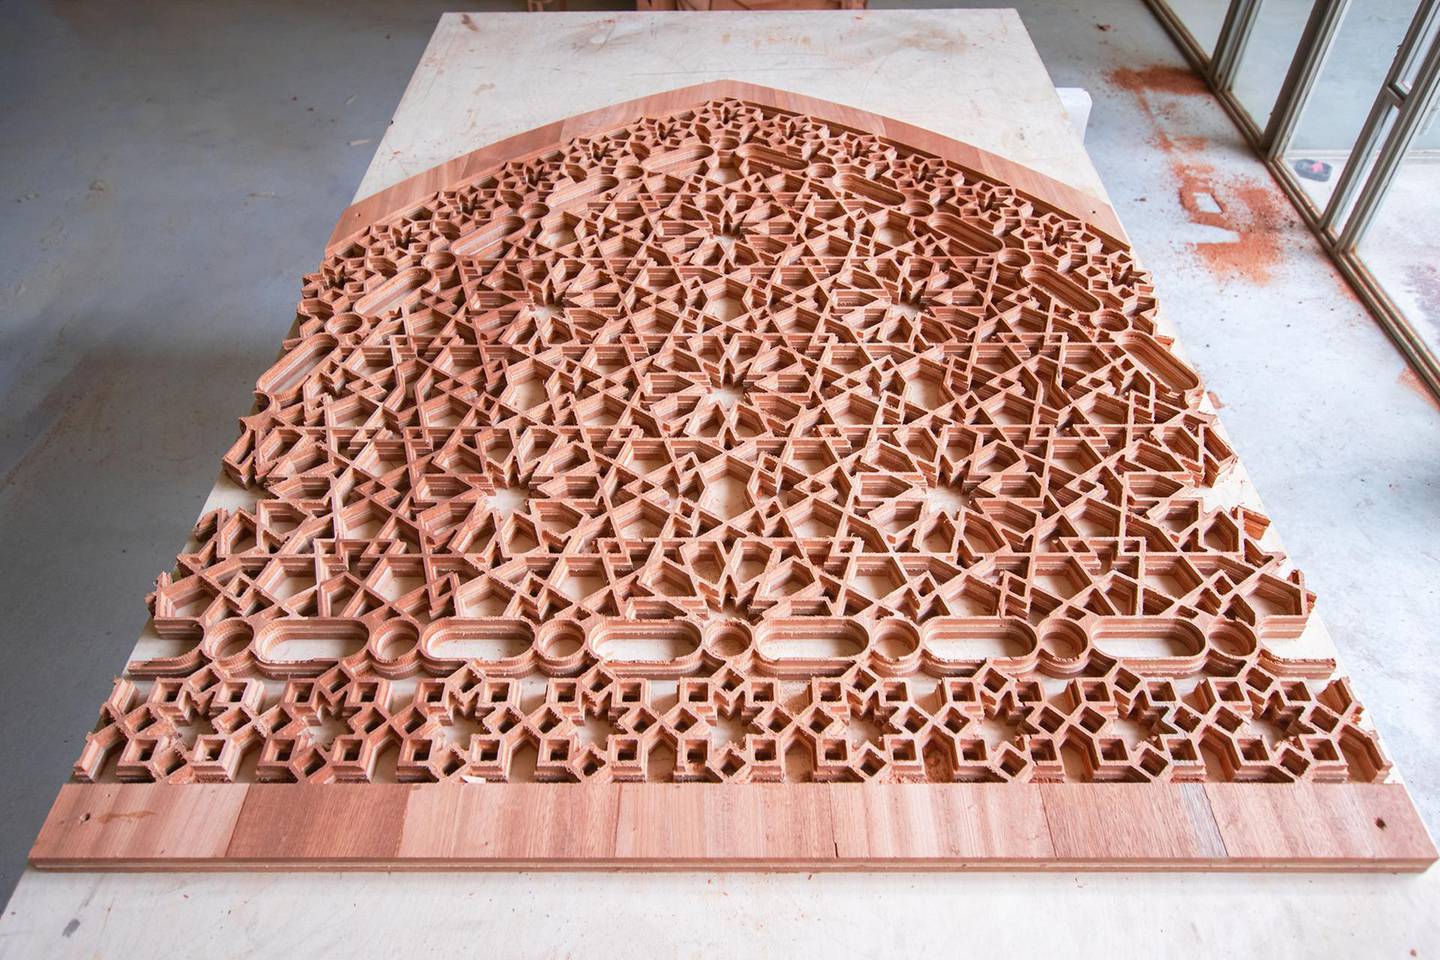 Carpenters in Tripoli have access to the CNC machine, which allows them to carve digital patterns. Photo: Ahmad Zaatiti